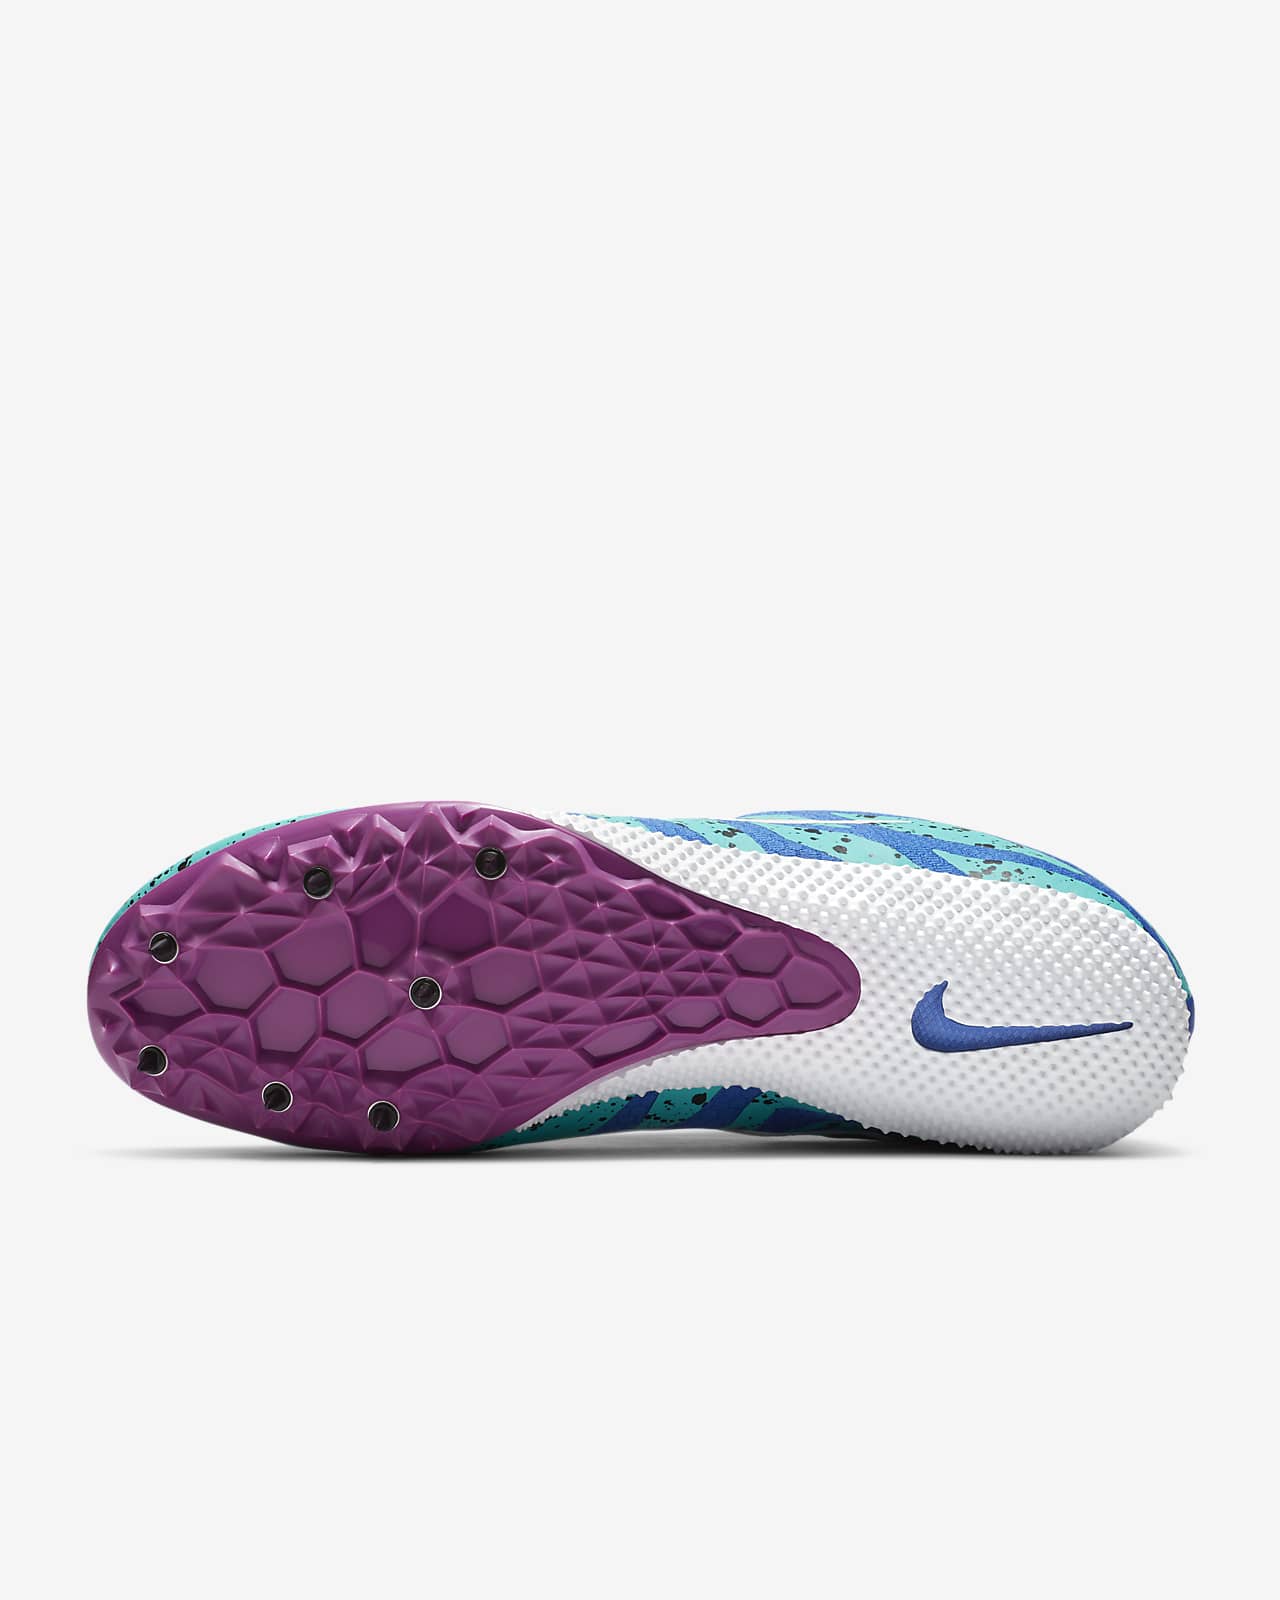 nike zoom rival s 8 running spikes